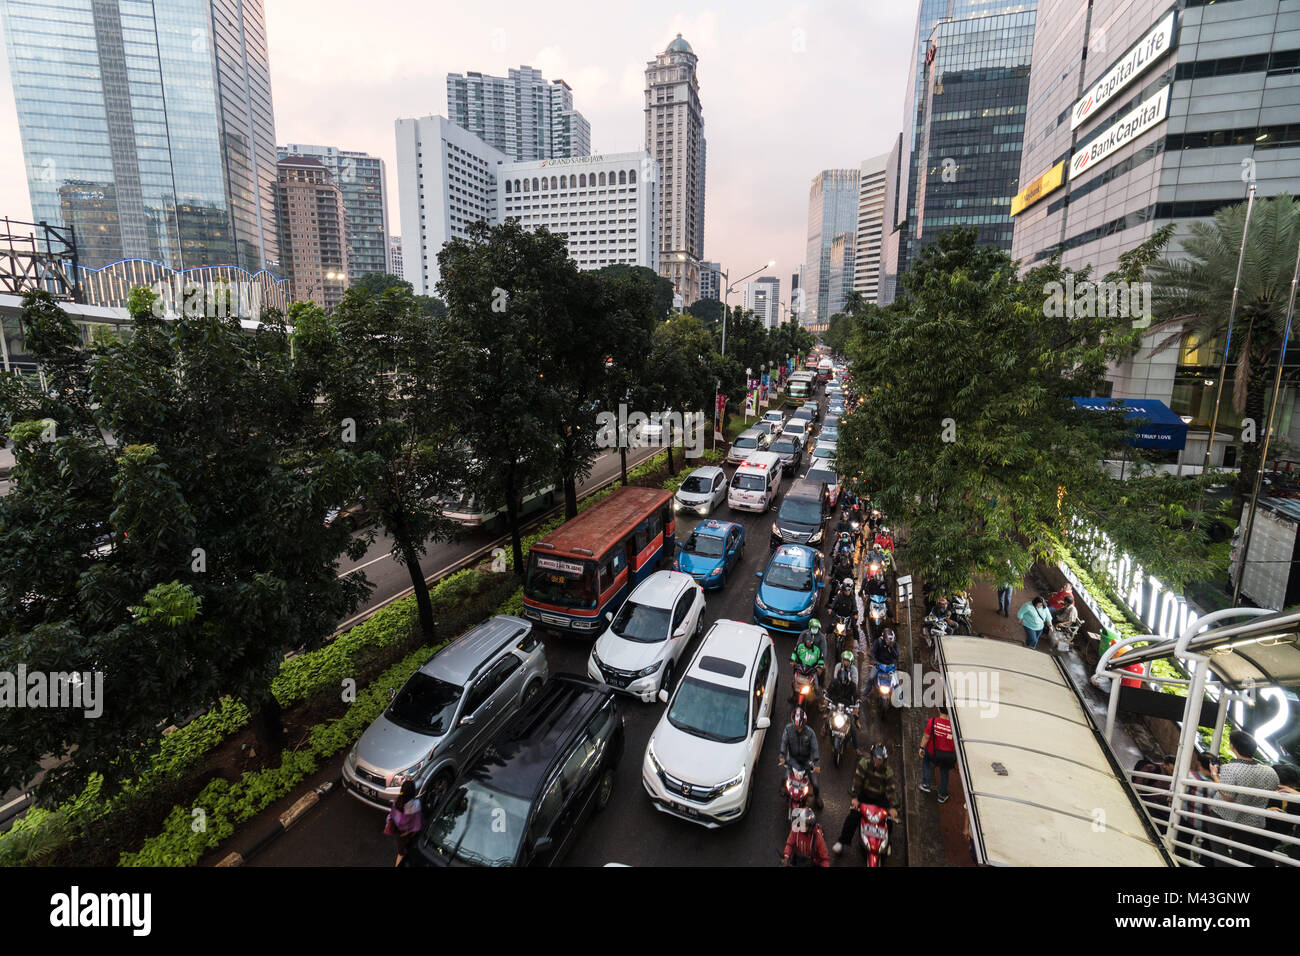 Jakarta, Indonesia - February 9 2018: Cars, buses and motorcycles stuck in a traffic jam on Sudirman street in Jakarta business district in Indonesia  Stock Photo